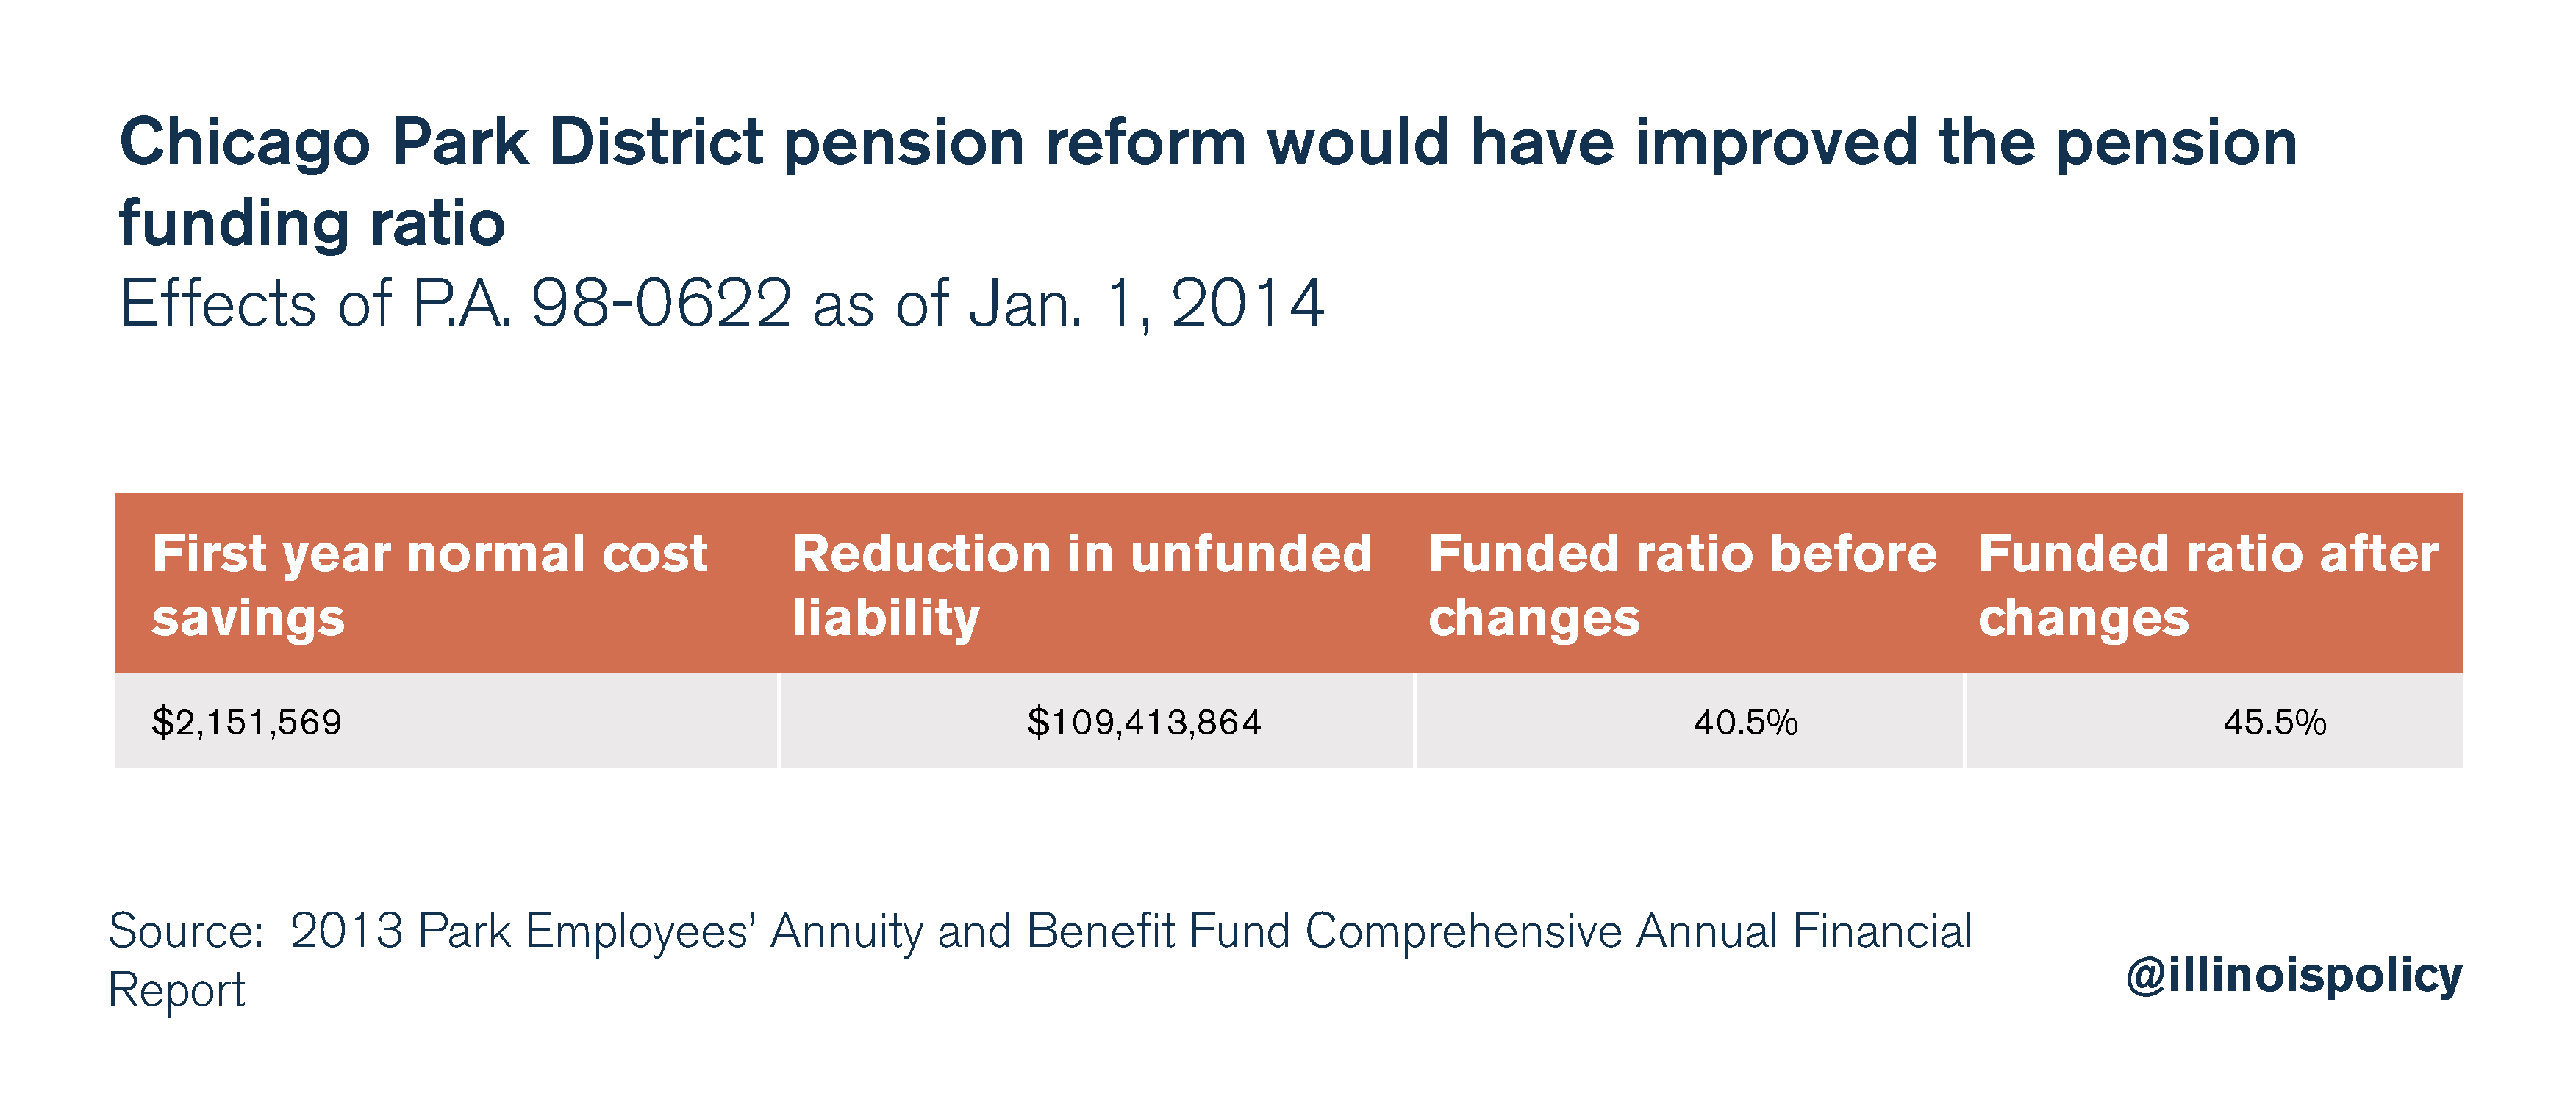 Chicago Park District pension reform would have improved the funding ratio